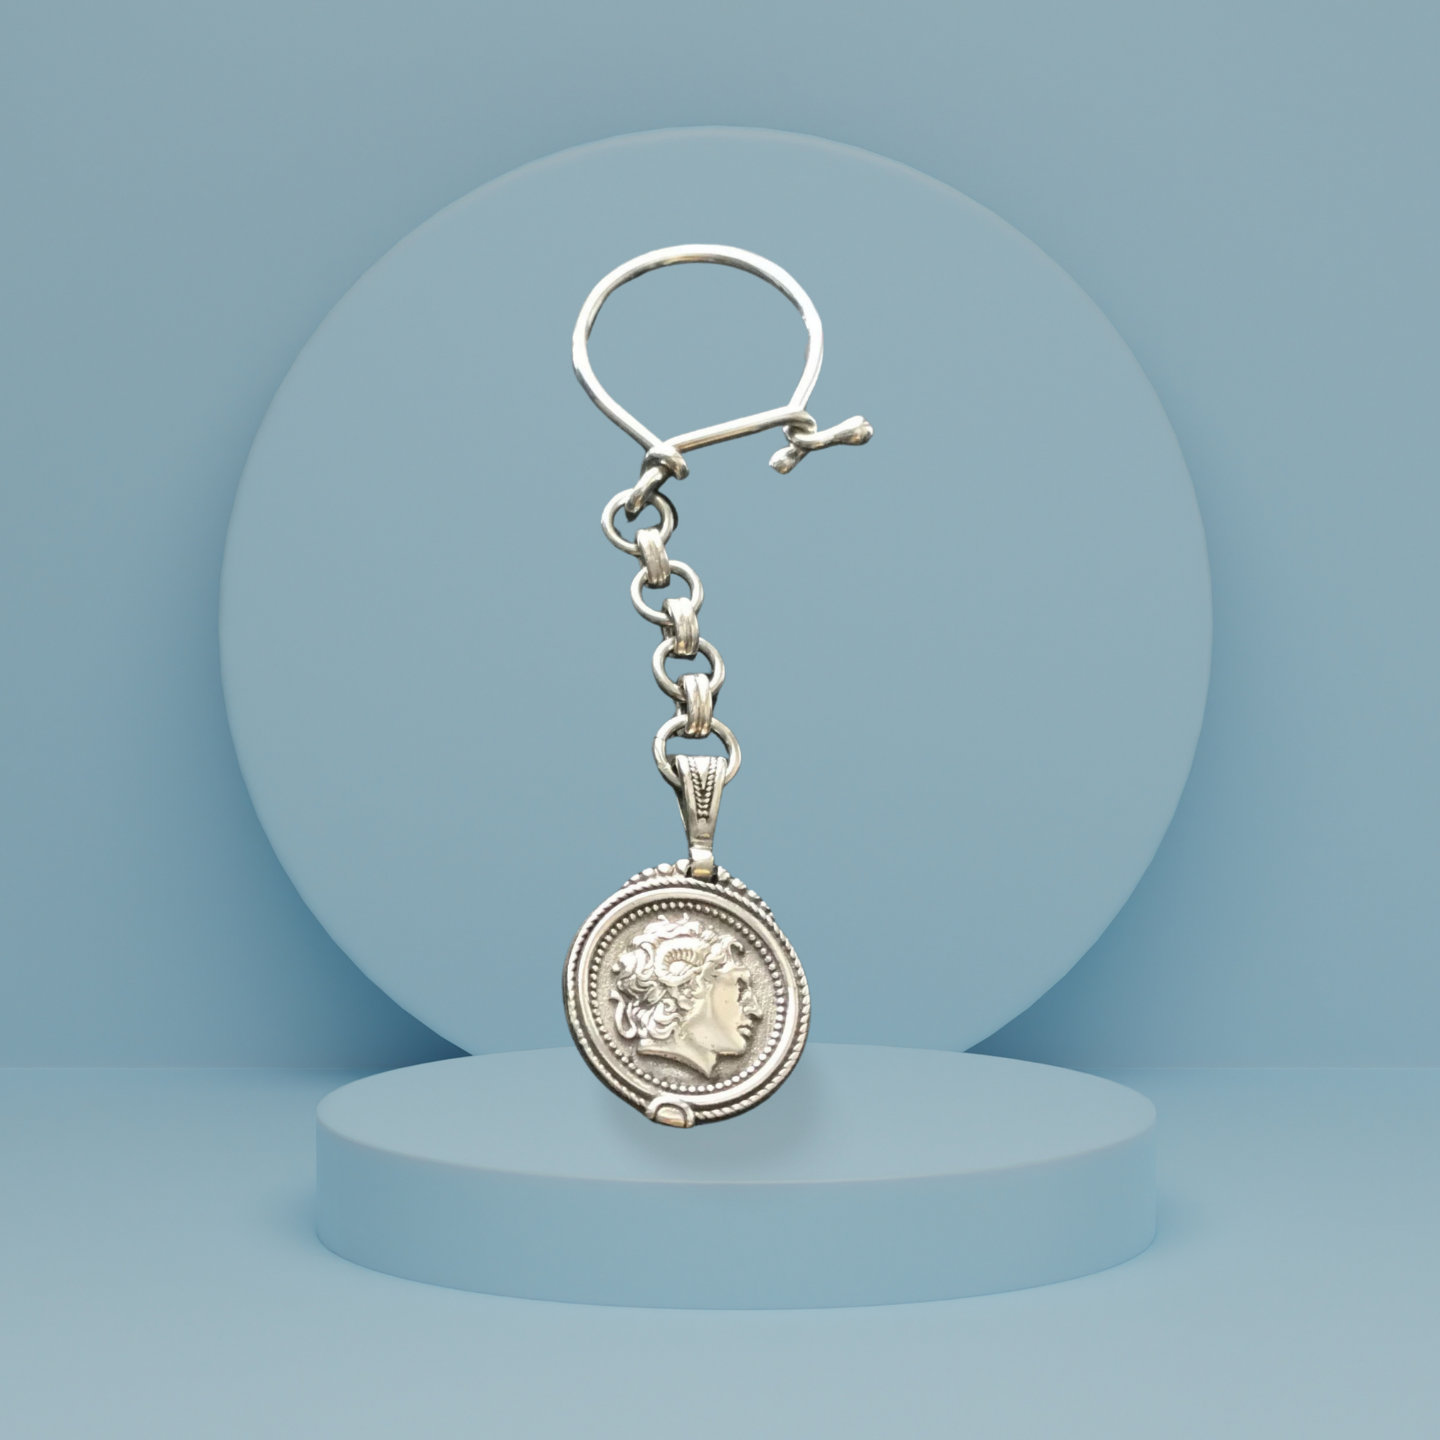 Men's Engravable Sterling Silver Keychains, Key Fobs, and Key Rings - The  Lanam Shop